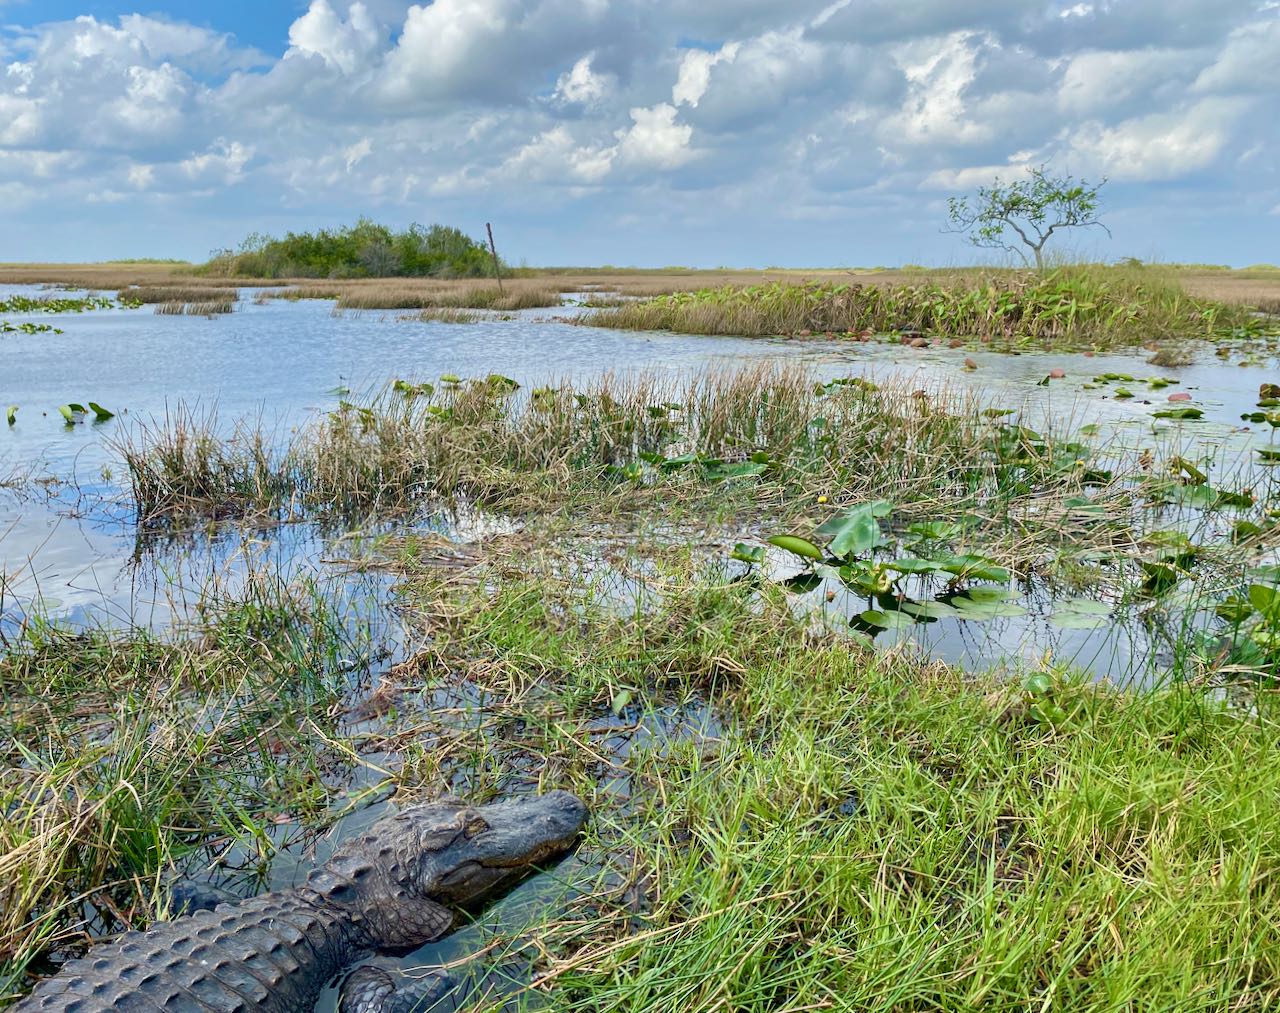 Alligator airboat tour Attractions and Places to Stop Along the Tamiami Trail/U.S. Highway 41